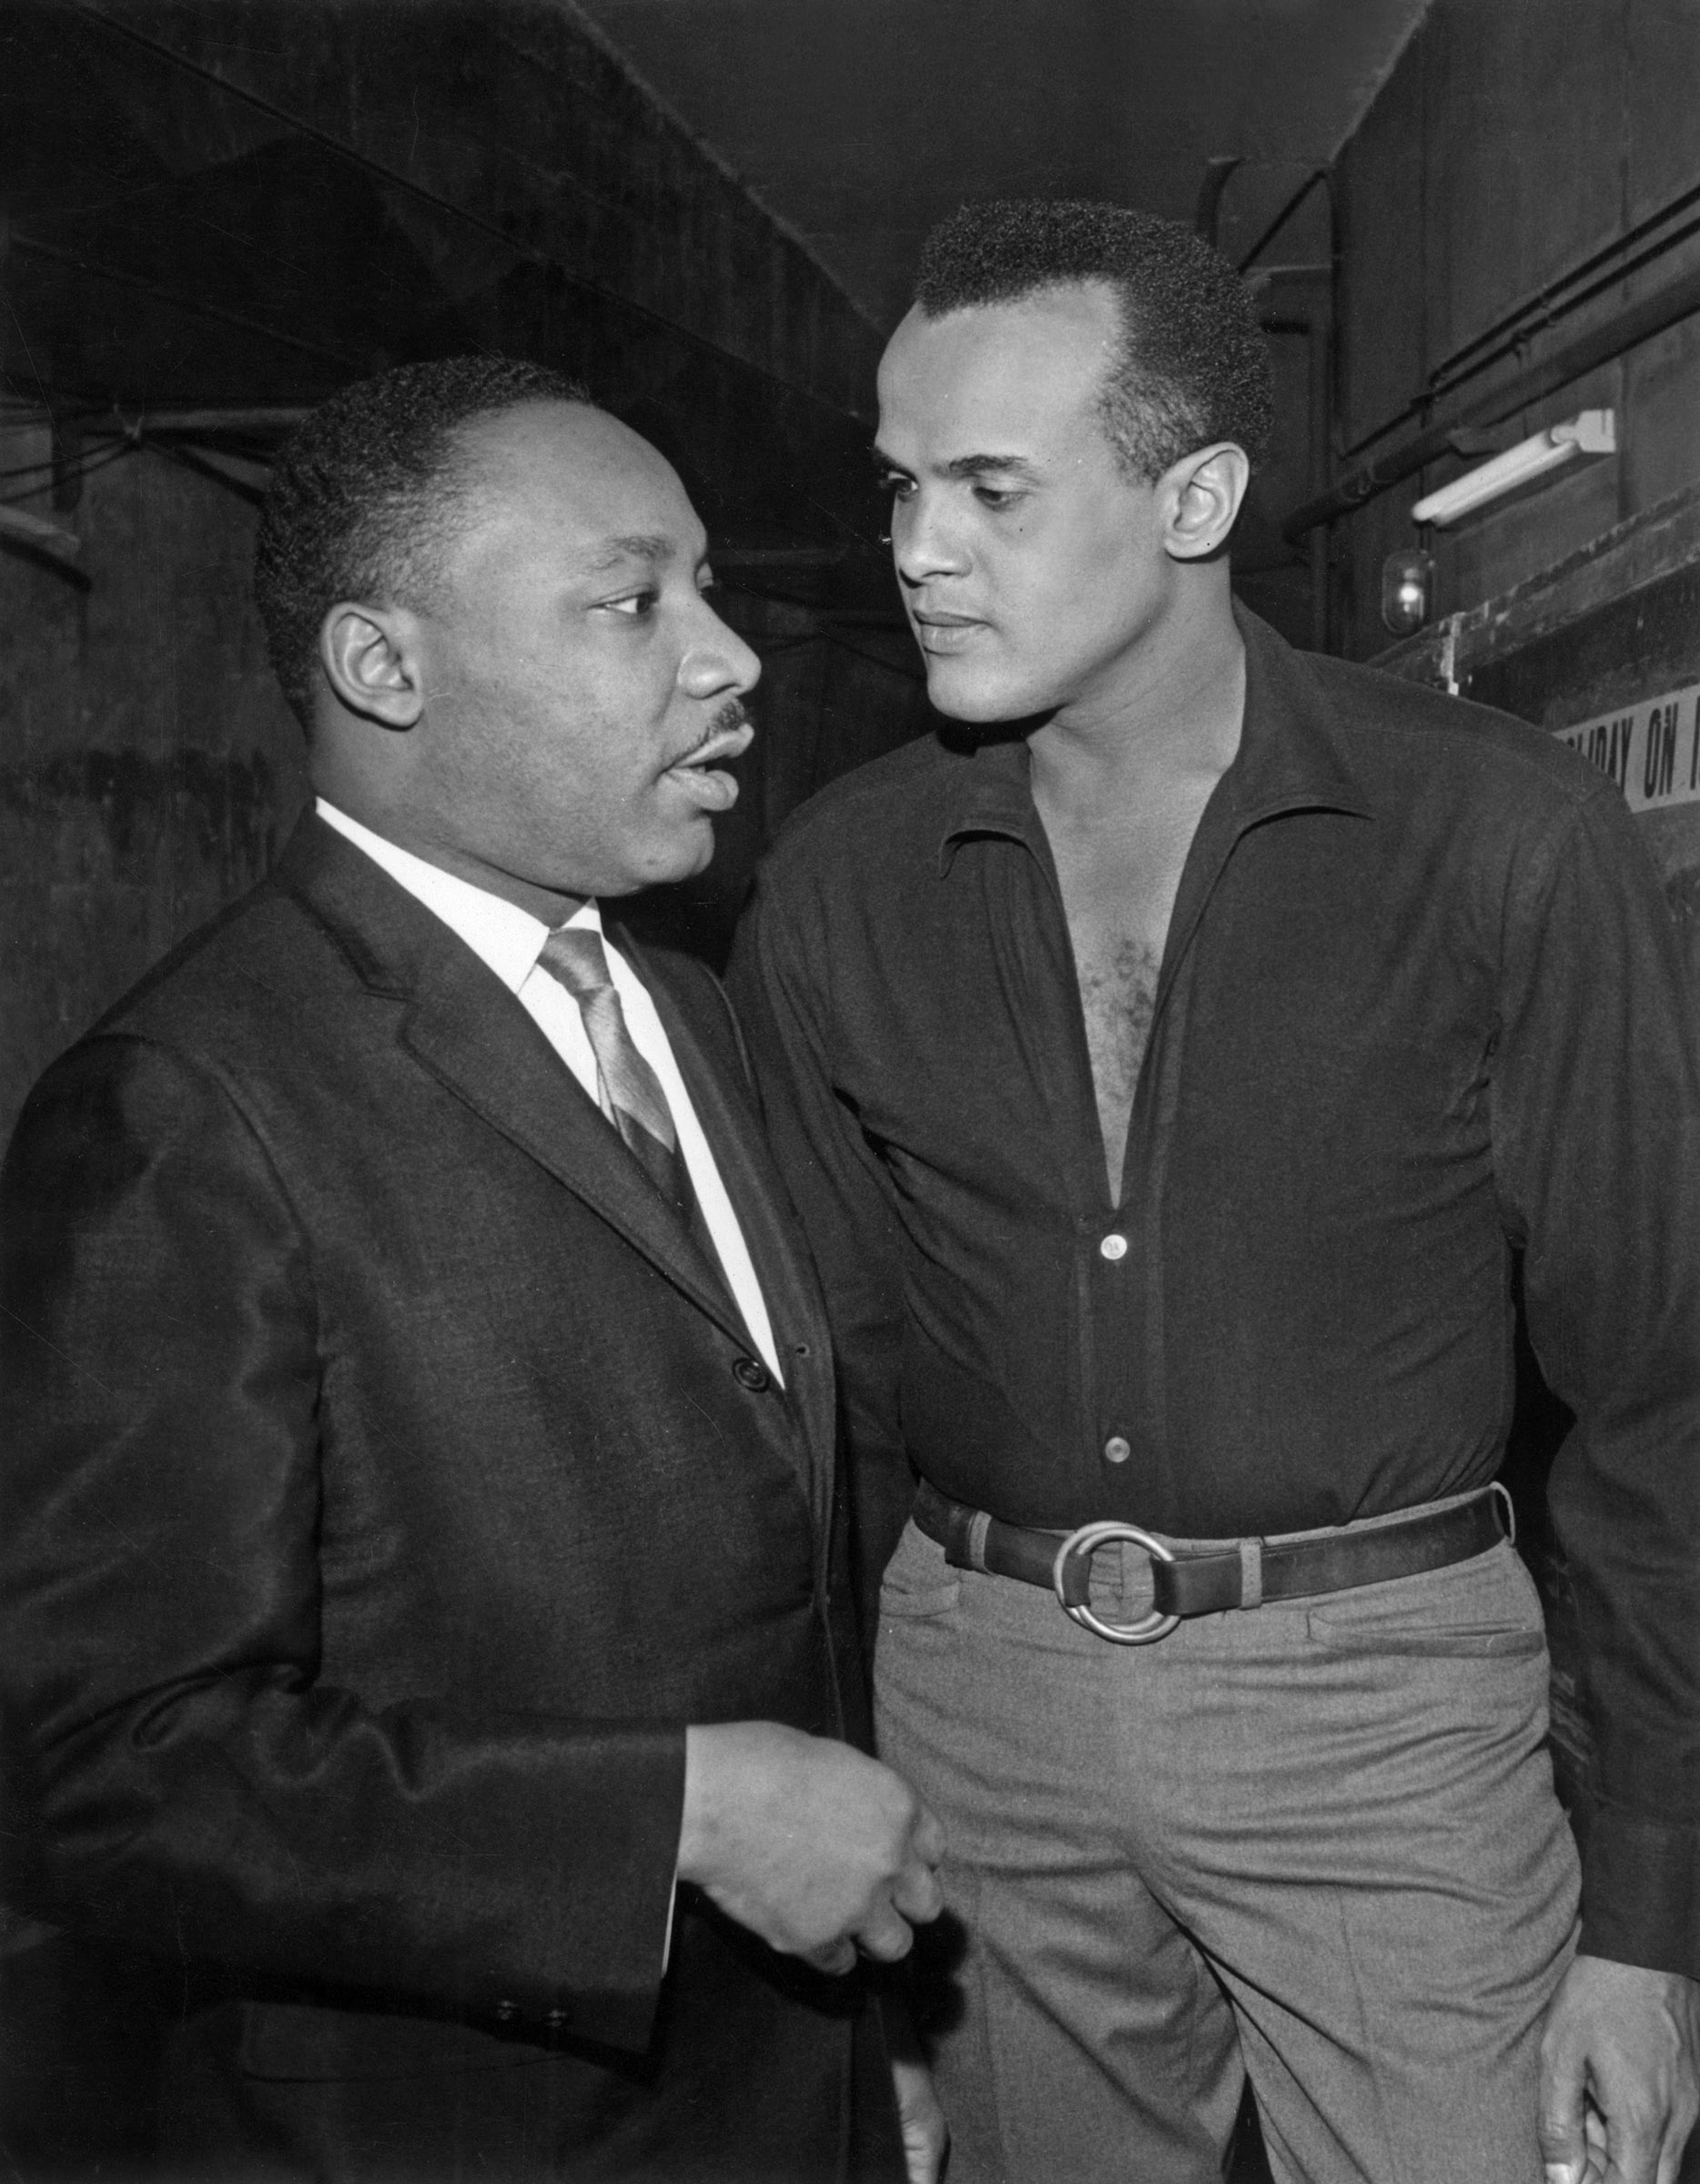 Martin Luther King Jr. and Harry Belafonte in Paris for a US civil rights gala on March 29, 1966. (AGIP/RDA/Everett Collection)